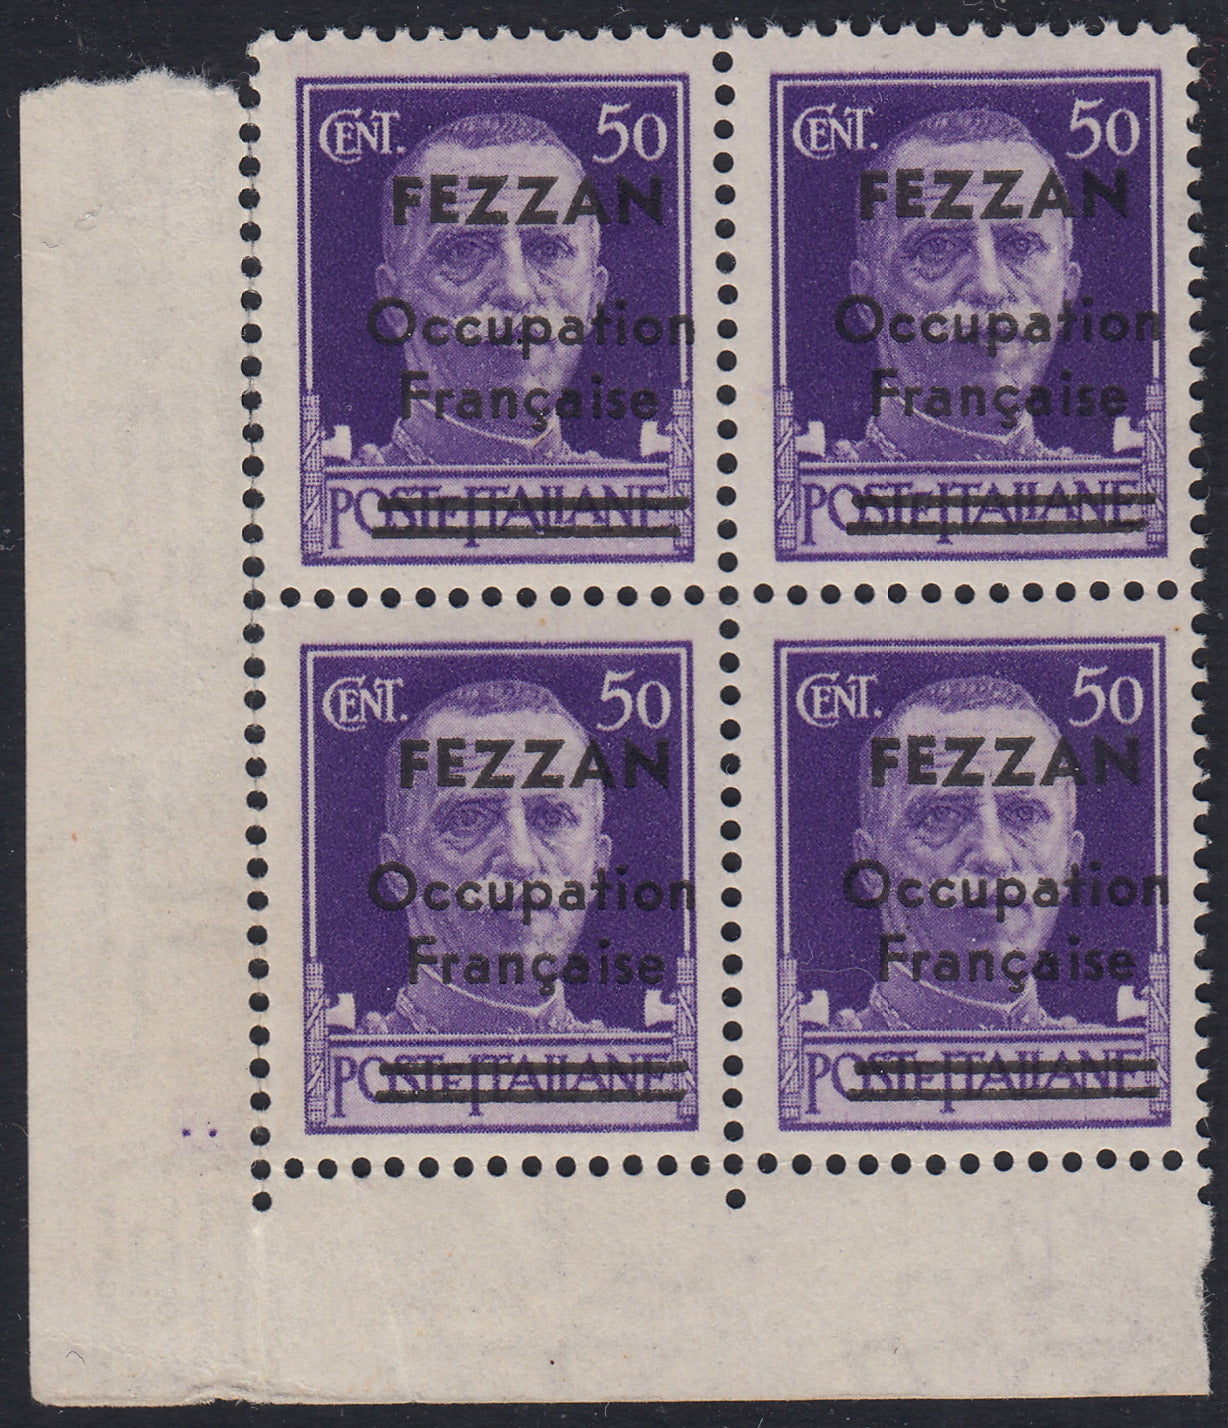 1945 - French occupation of Fezzan, Italian stamp from the Imperial series c. 50 violet overprinted FEZZAN Occupation Francaise and bars on Poste Italiane new with intact gum in block of four (1). 